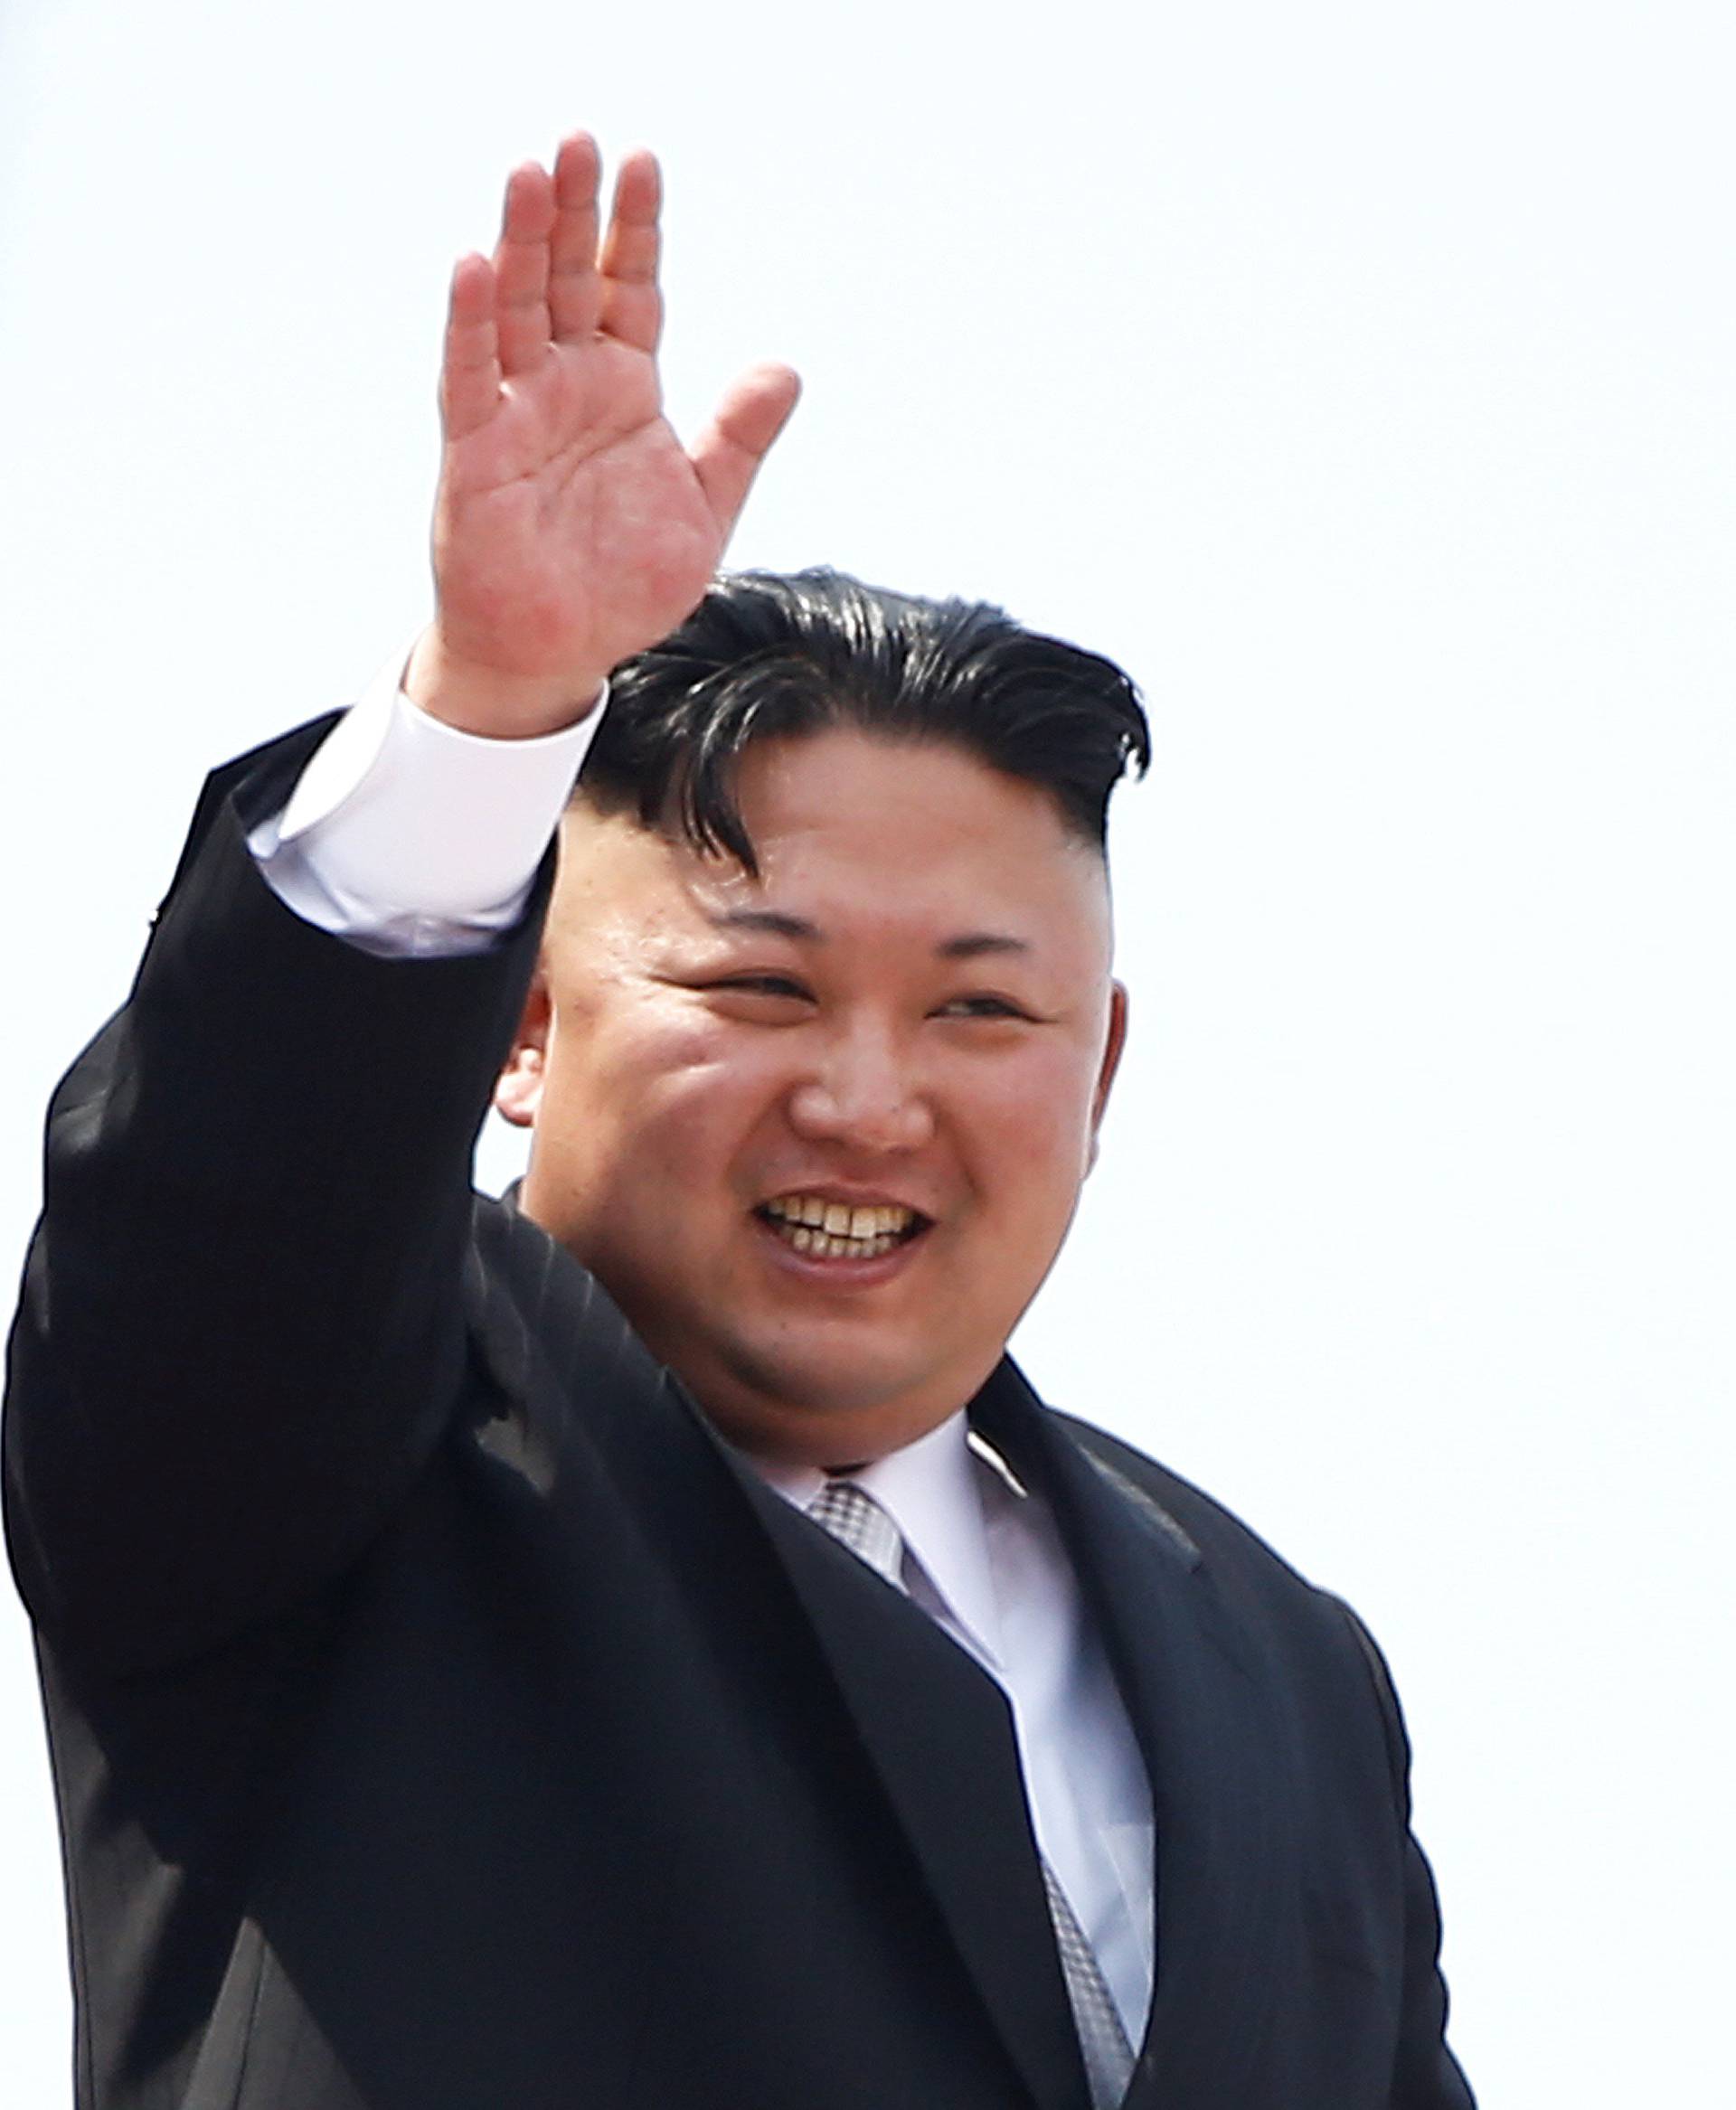 FILE PHOTO:North Korean leader Kim Jong Un waves to people attending a military parade marking the 105th birth anniversary of country's founding father, Kim Il Sung in Pyongyang